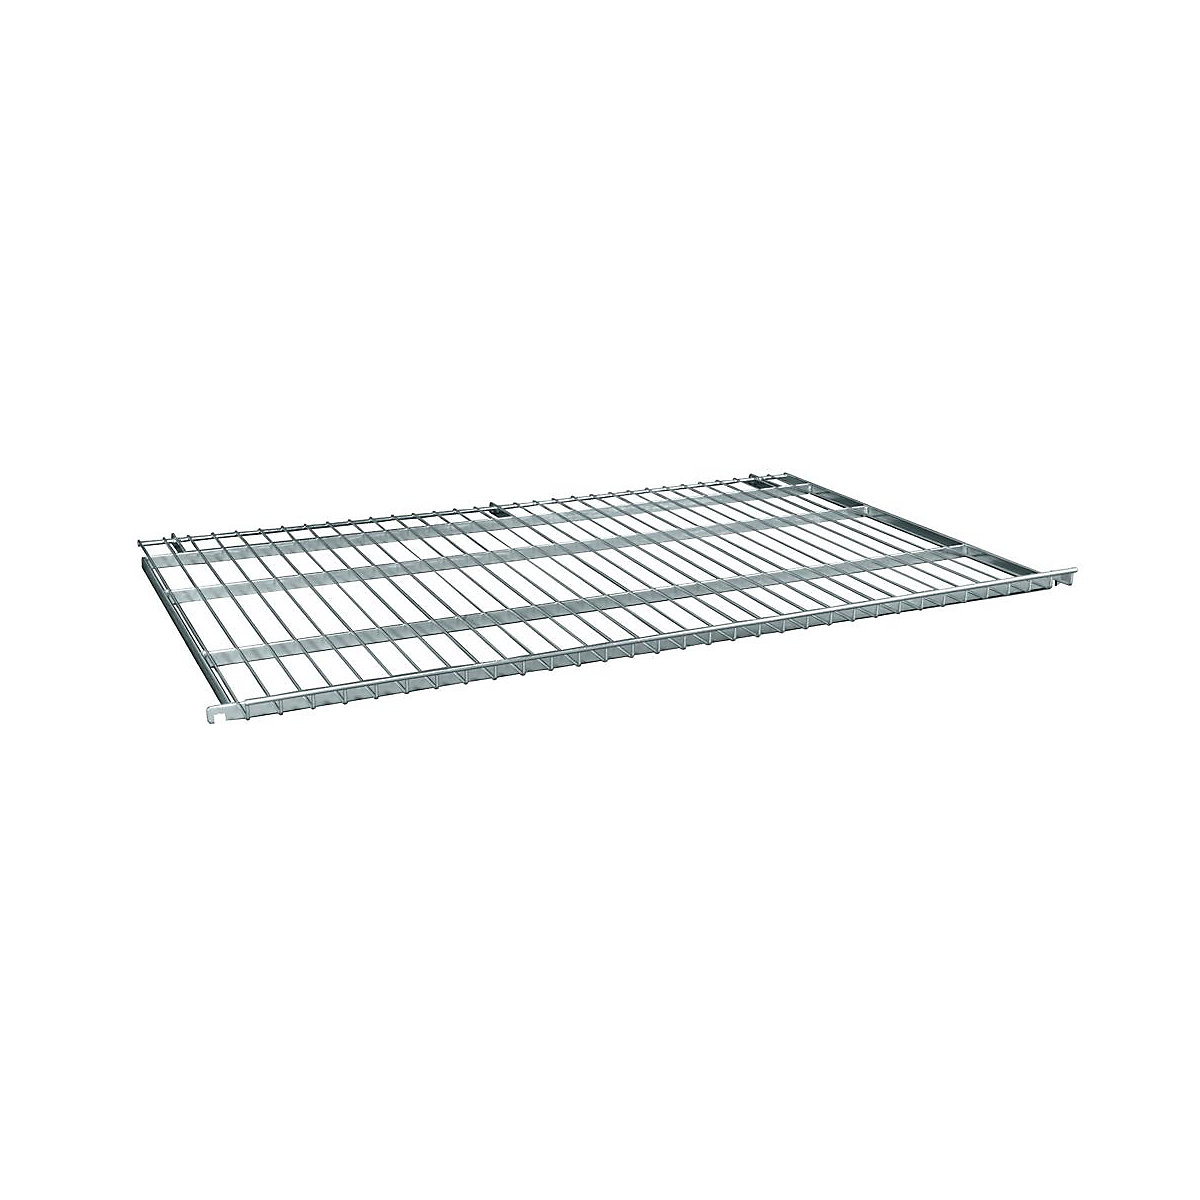 Intermediate shelf for steel roll container, for WxD 800 x 1200 mm, with 20 mm raised edges, can be suspended diagonally